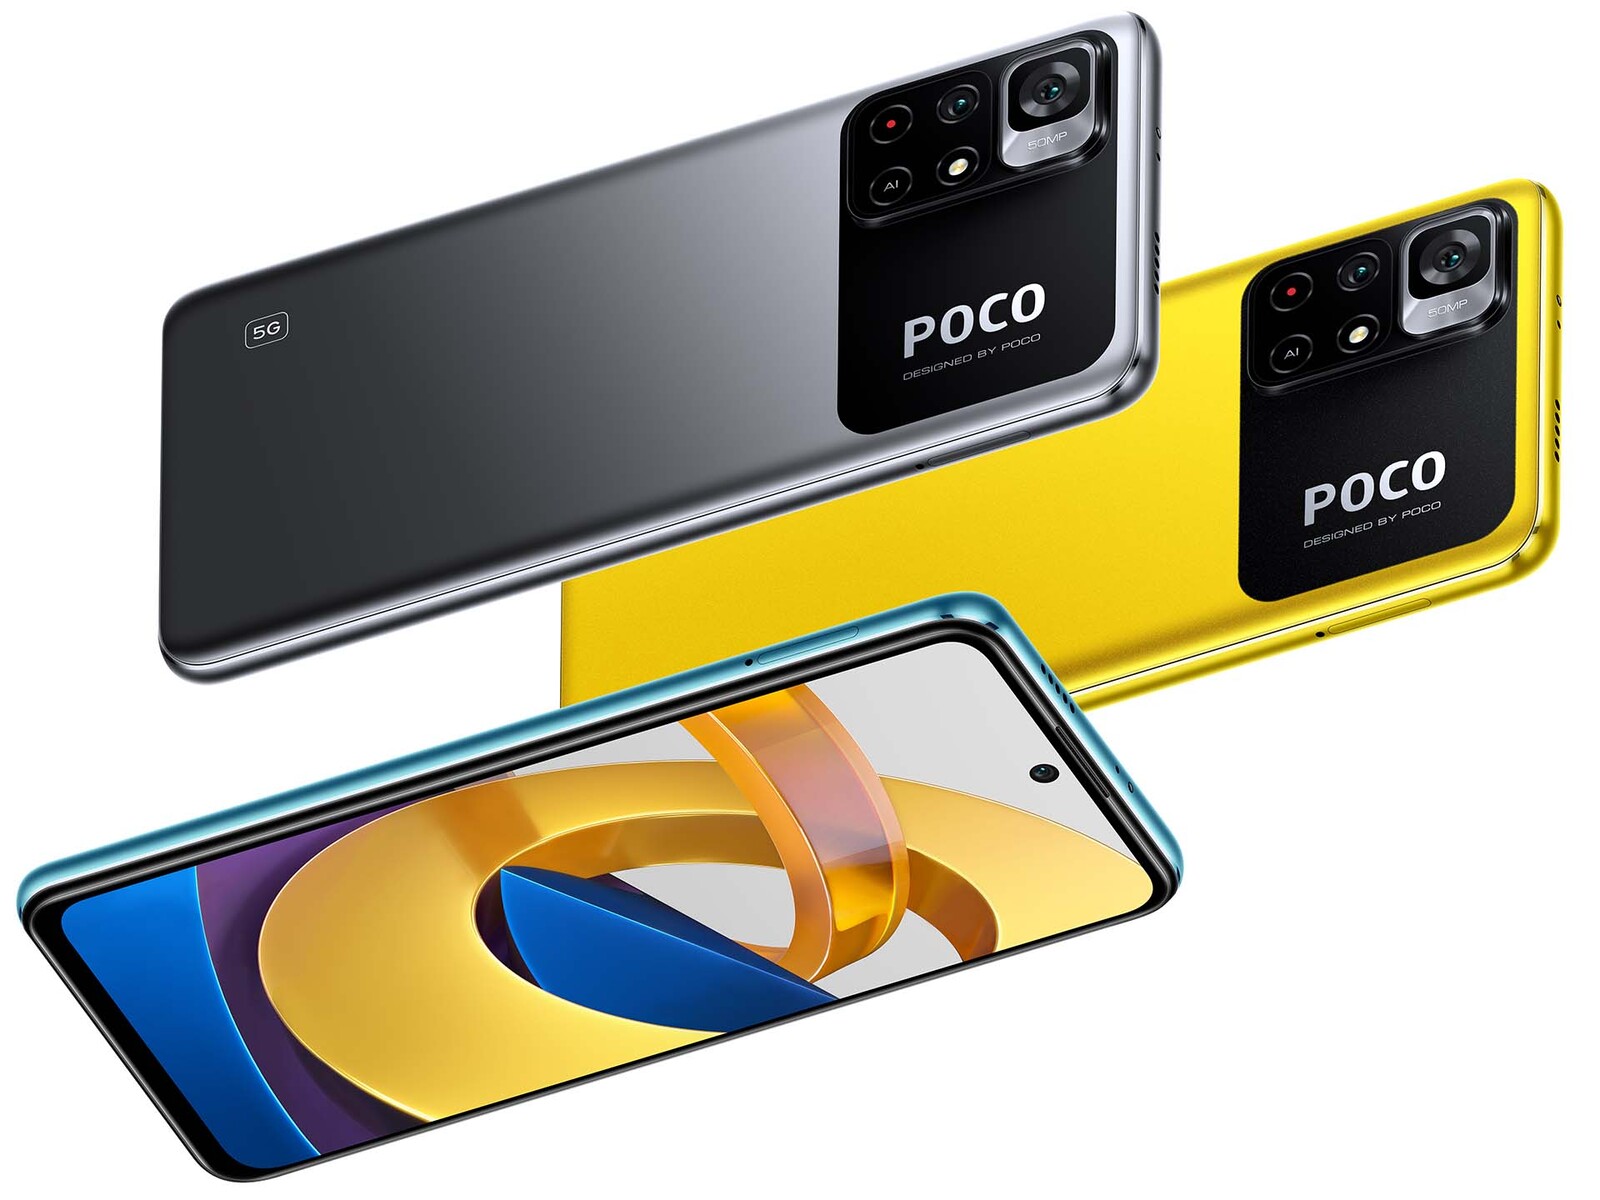 POCO M4 Pro 5G: Incredibly equipped cheap Chinese